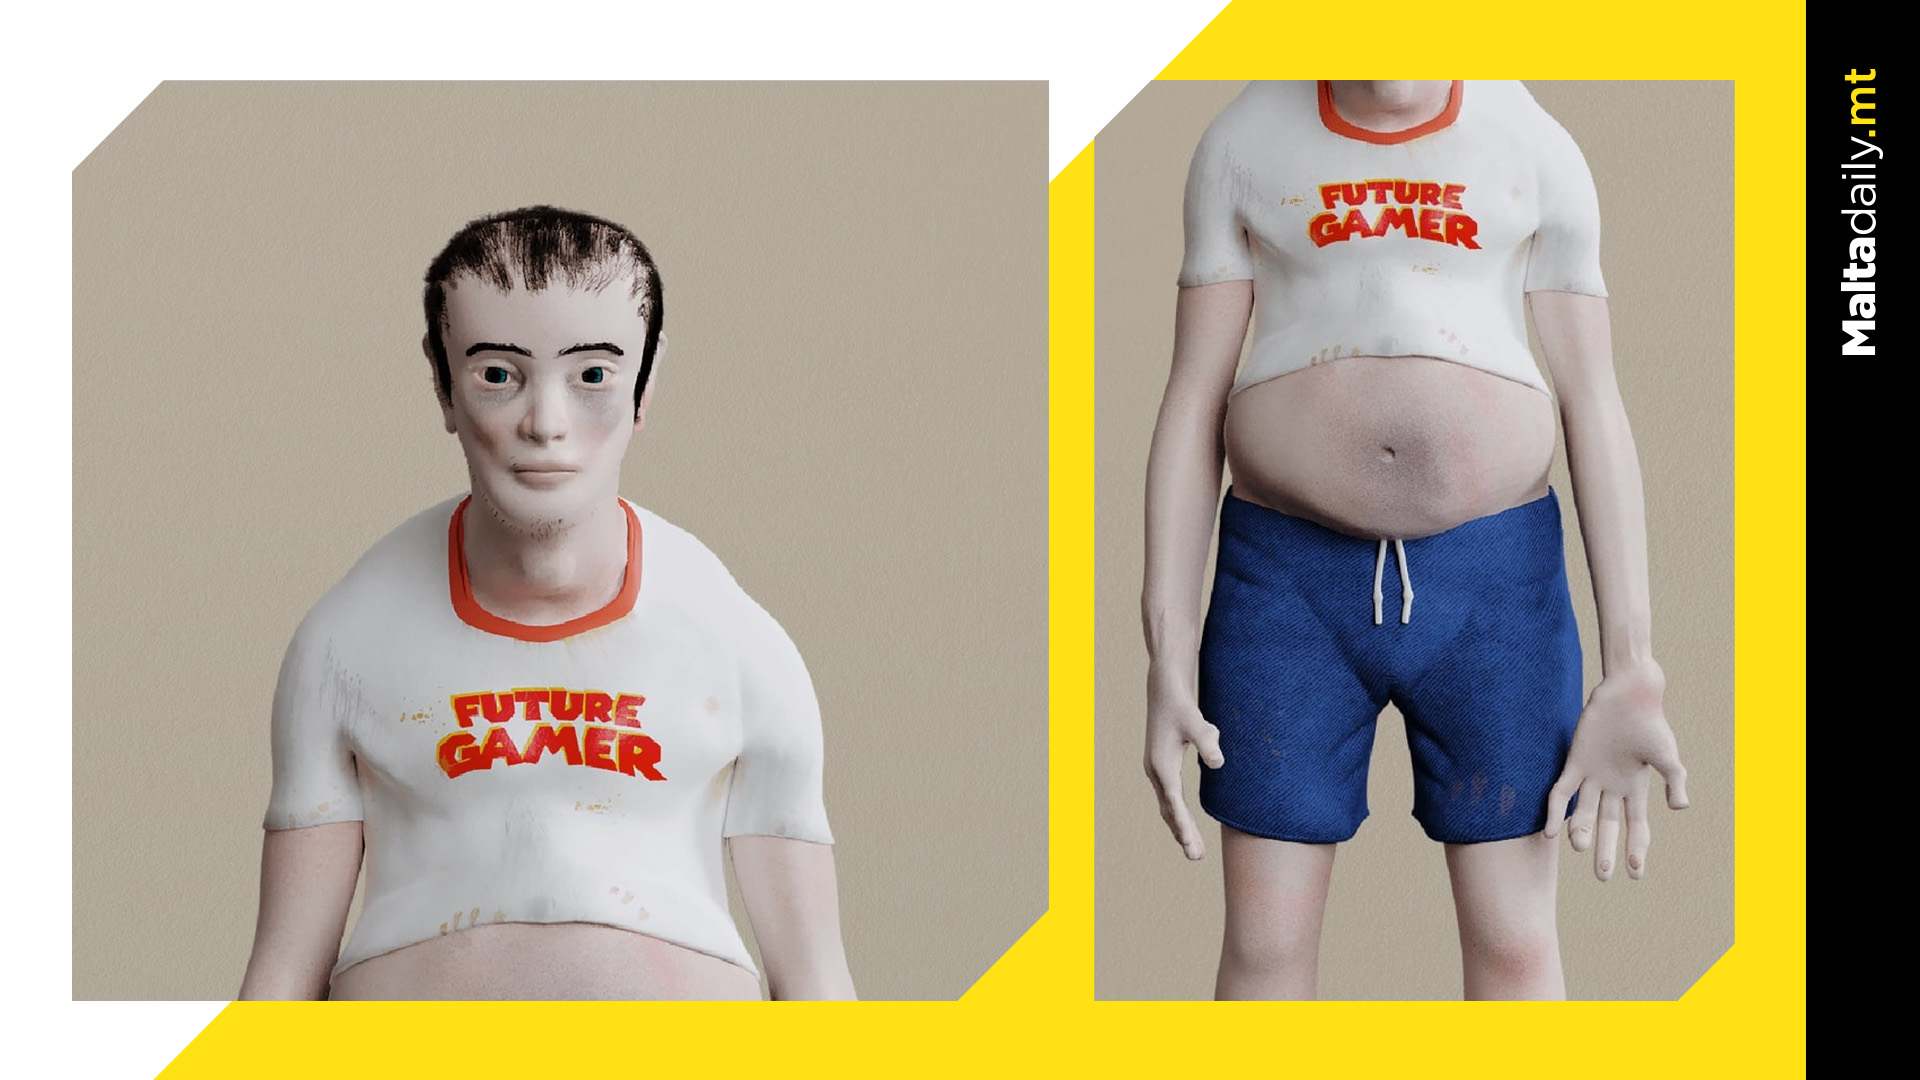 Shocking model shows what hardcore gamers could look like in 20 years